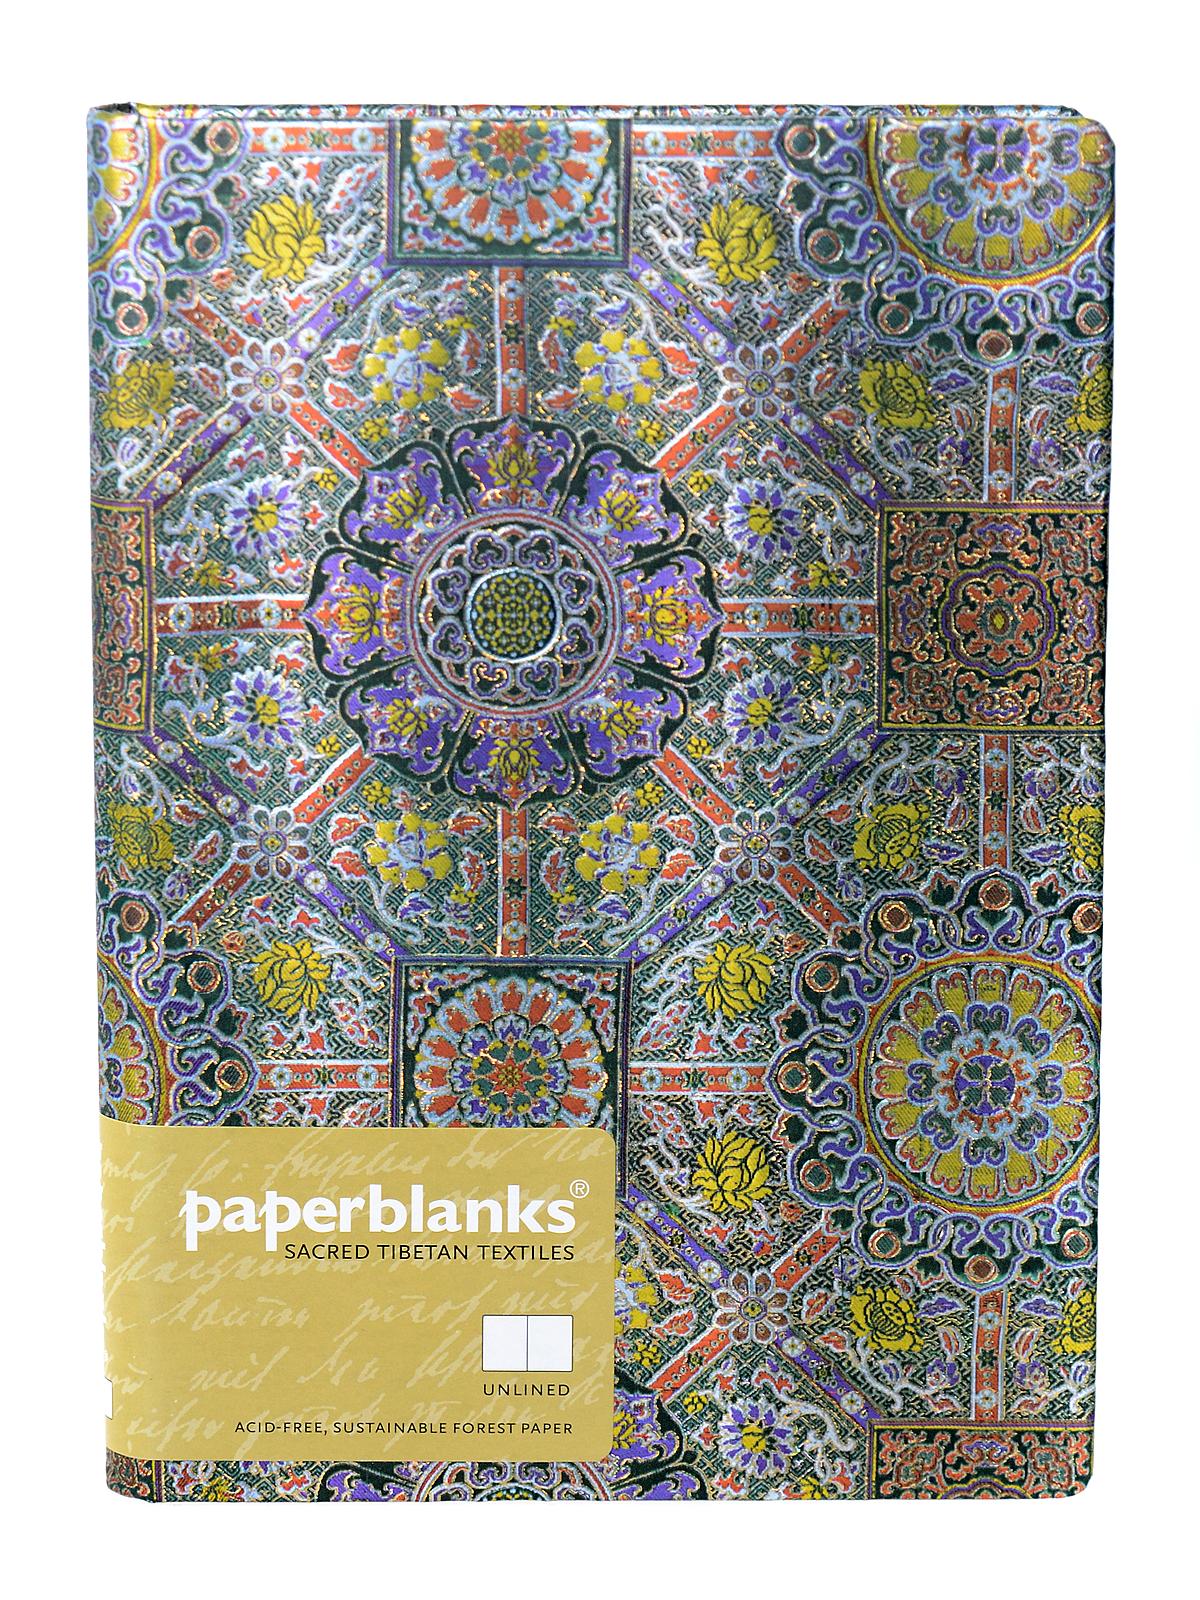 Sacred Tibetan Textiles Padma Midi, 5 In. X 7 In. 144 Pages, Unlined